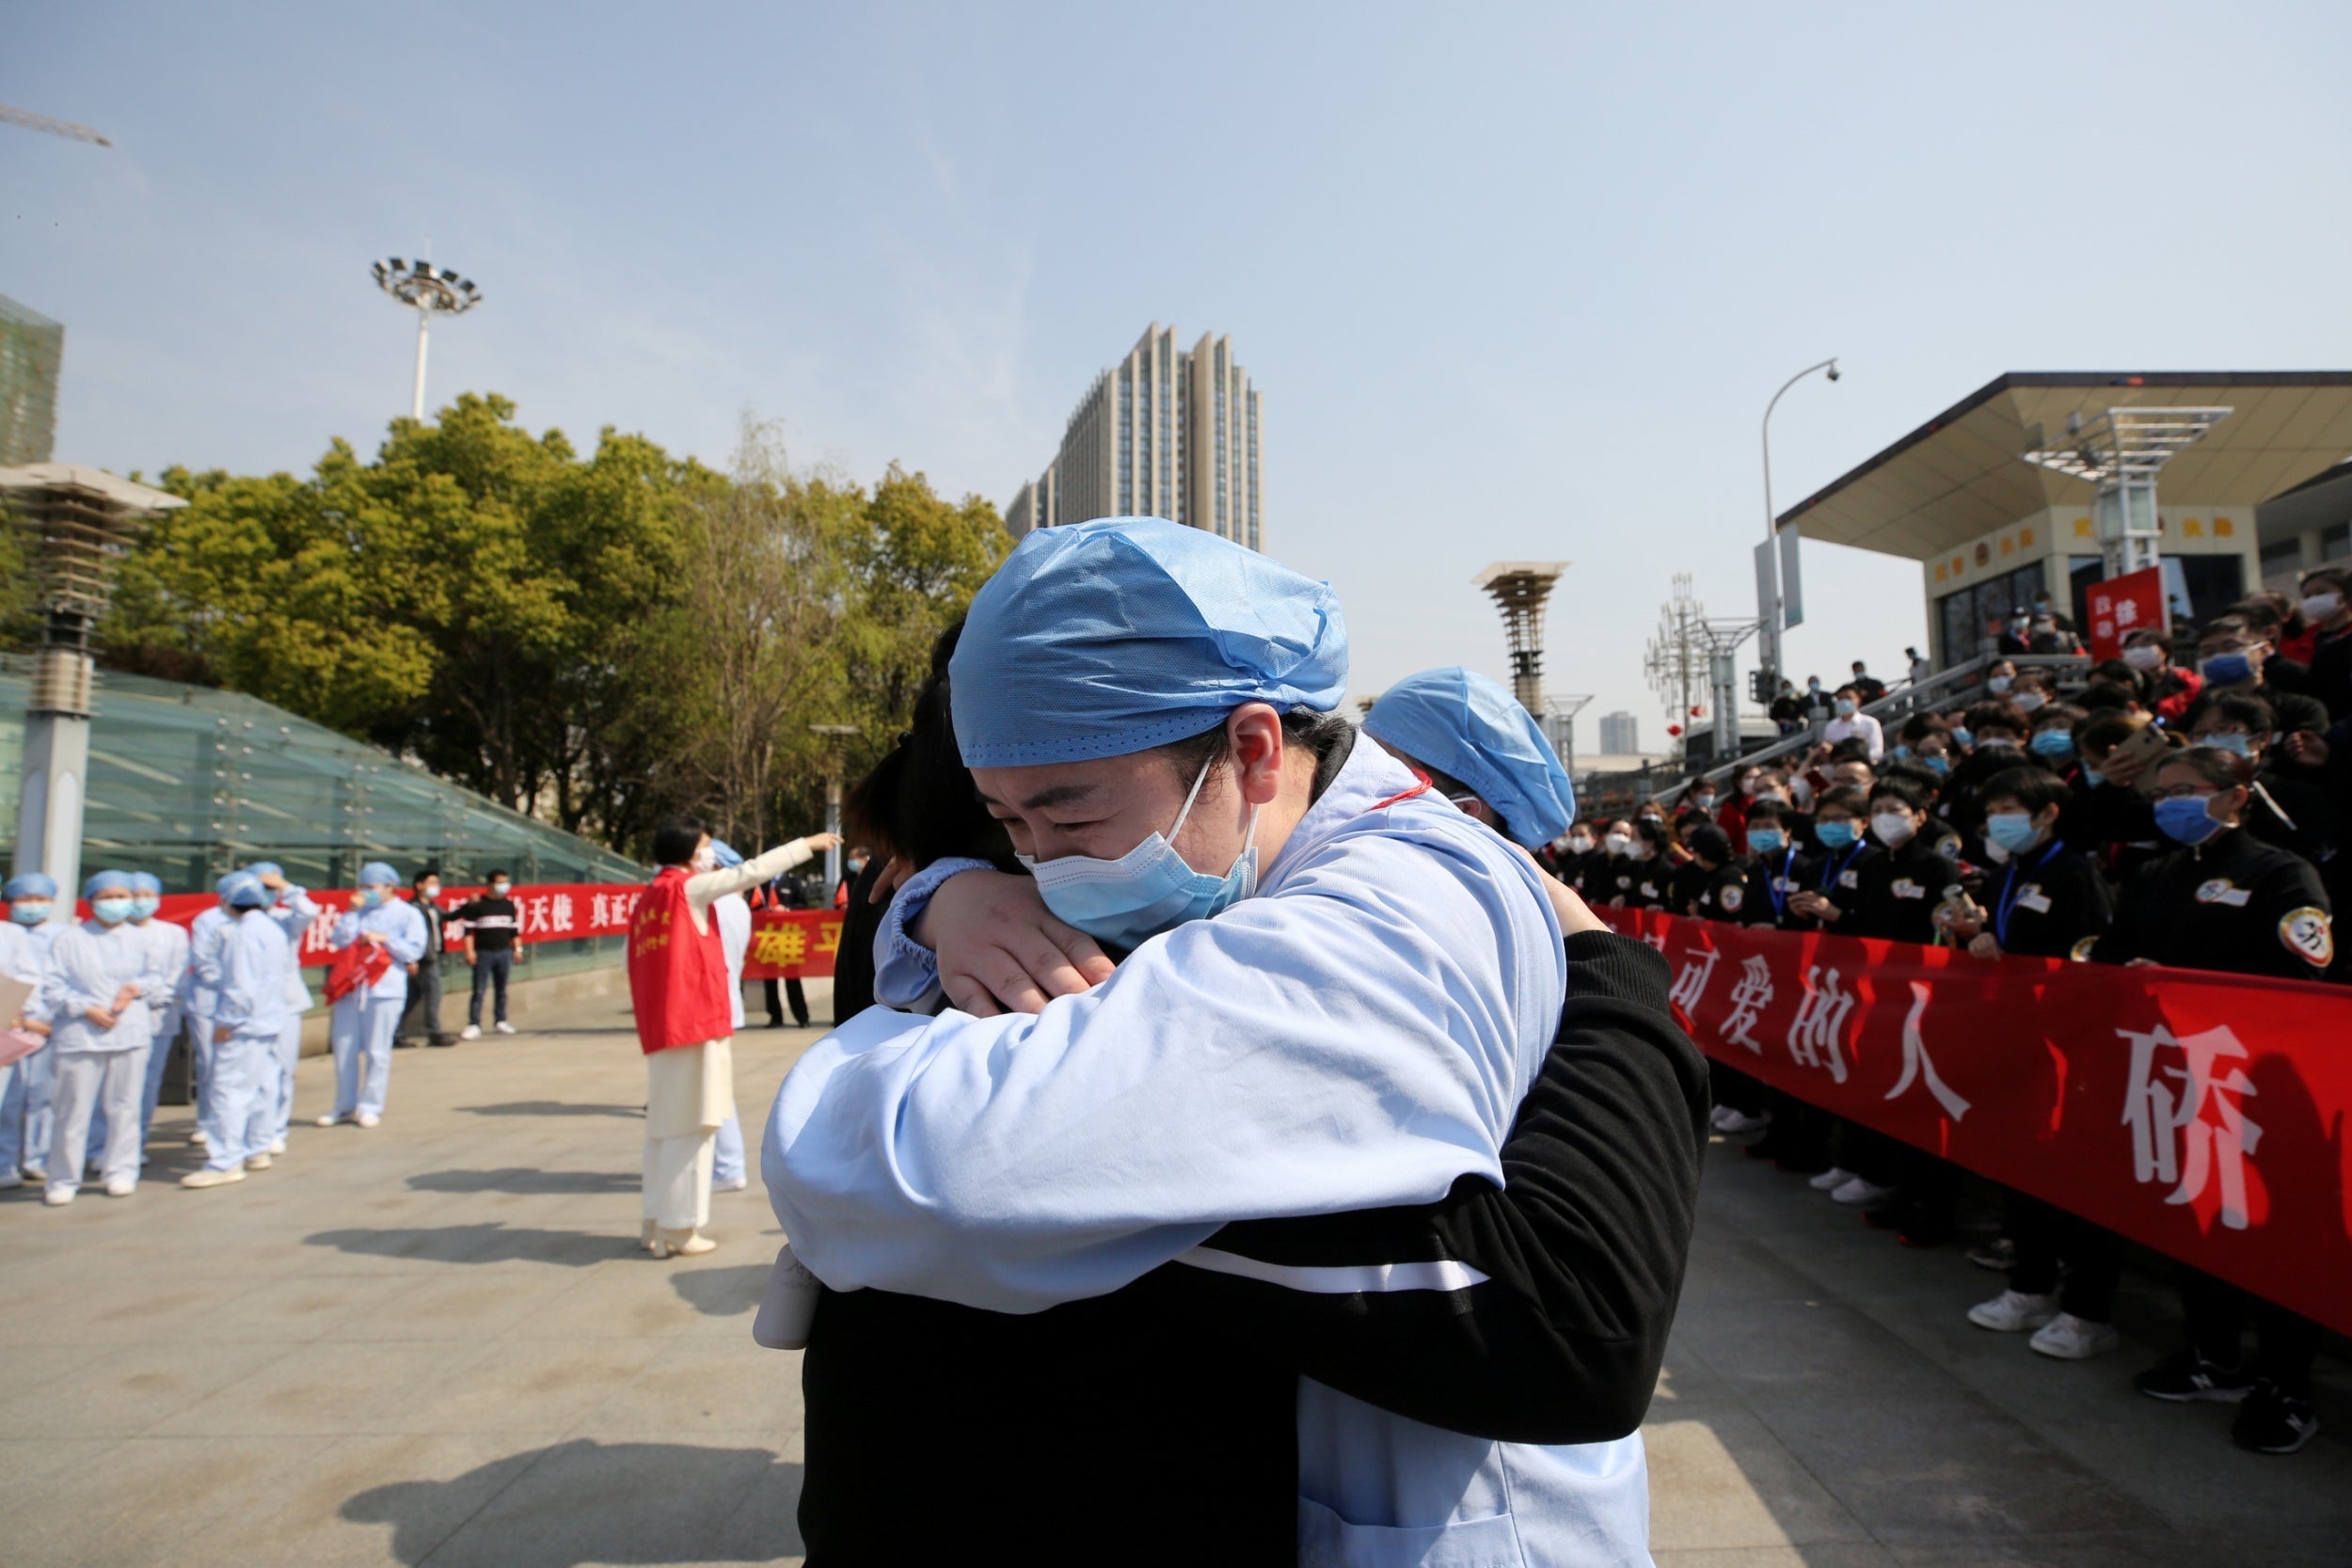 A local medical worker bids farewell to a medical worker from Jiangsu at Wuhan Railway Station as the medical team from Jiangsu leaves the city